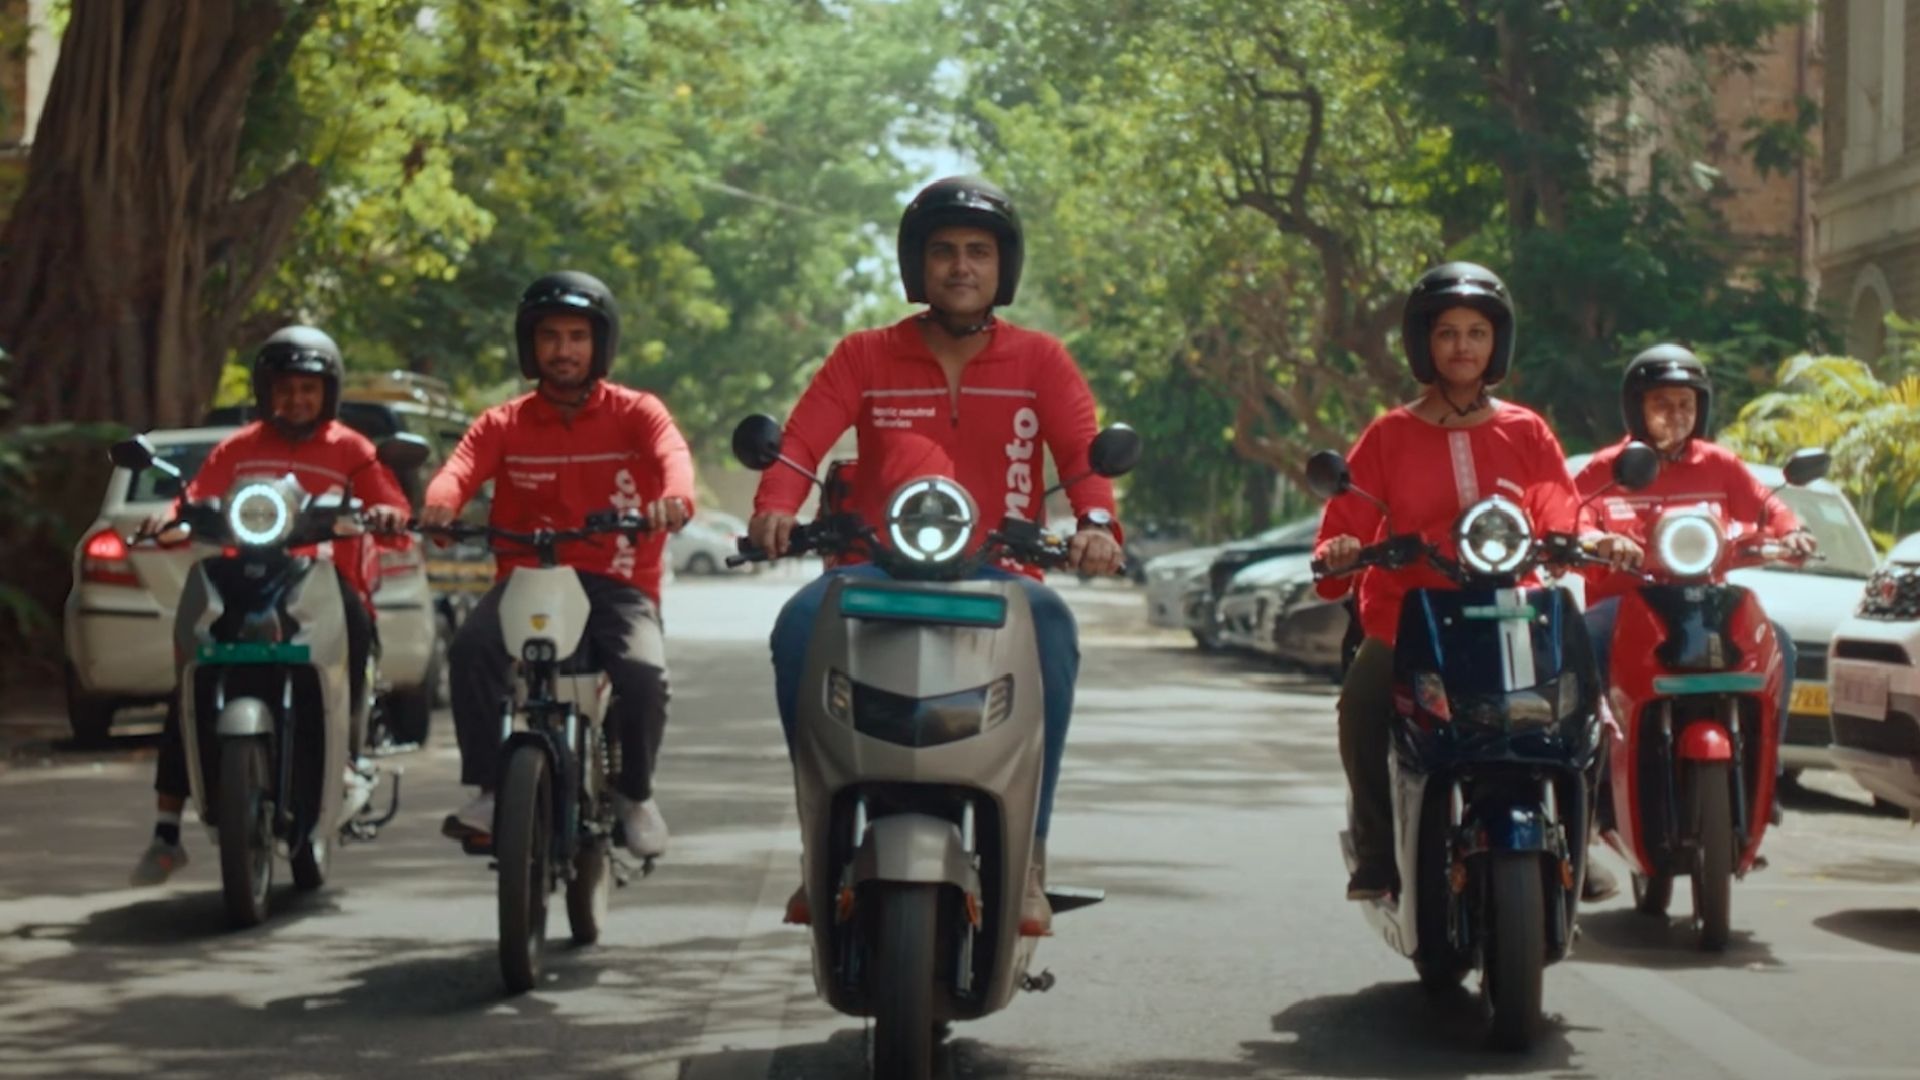 Zomato aims for 100% EV-based deliveries by 2030 (Source: Zomato)